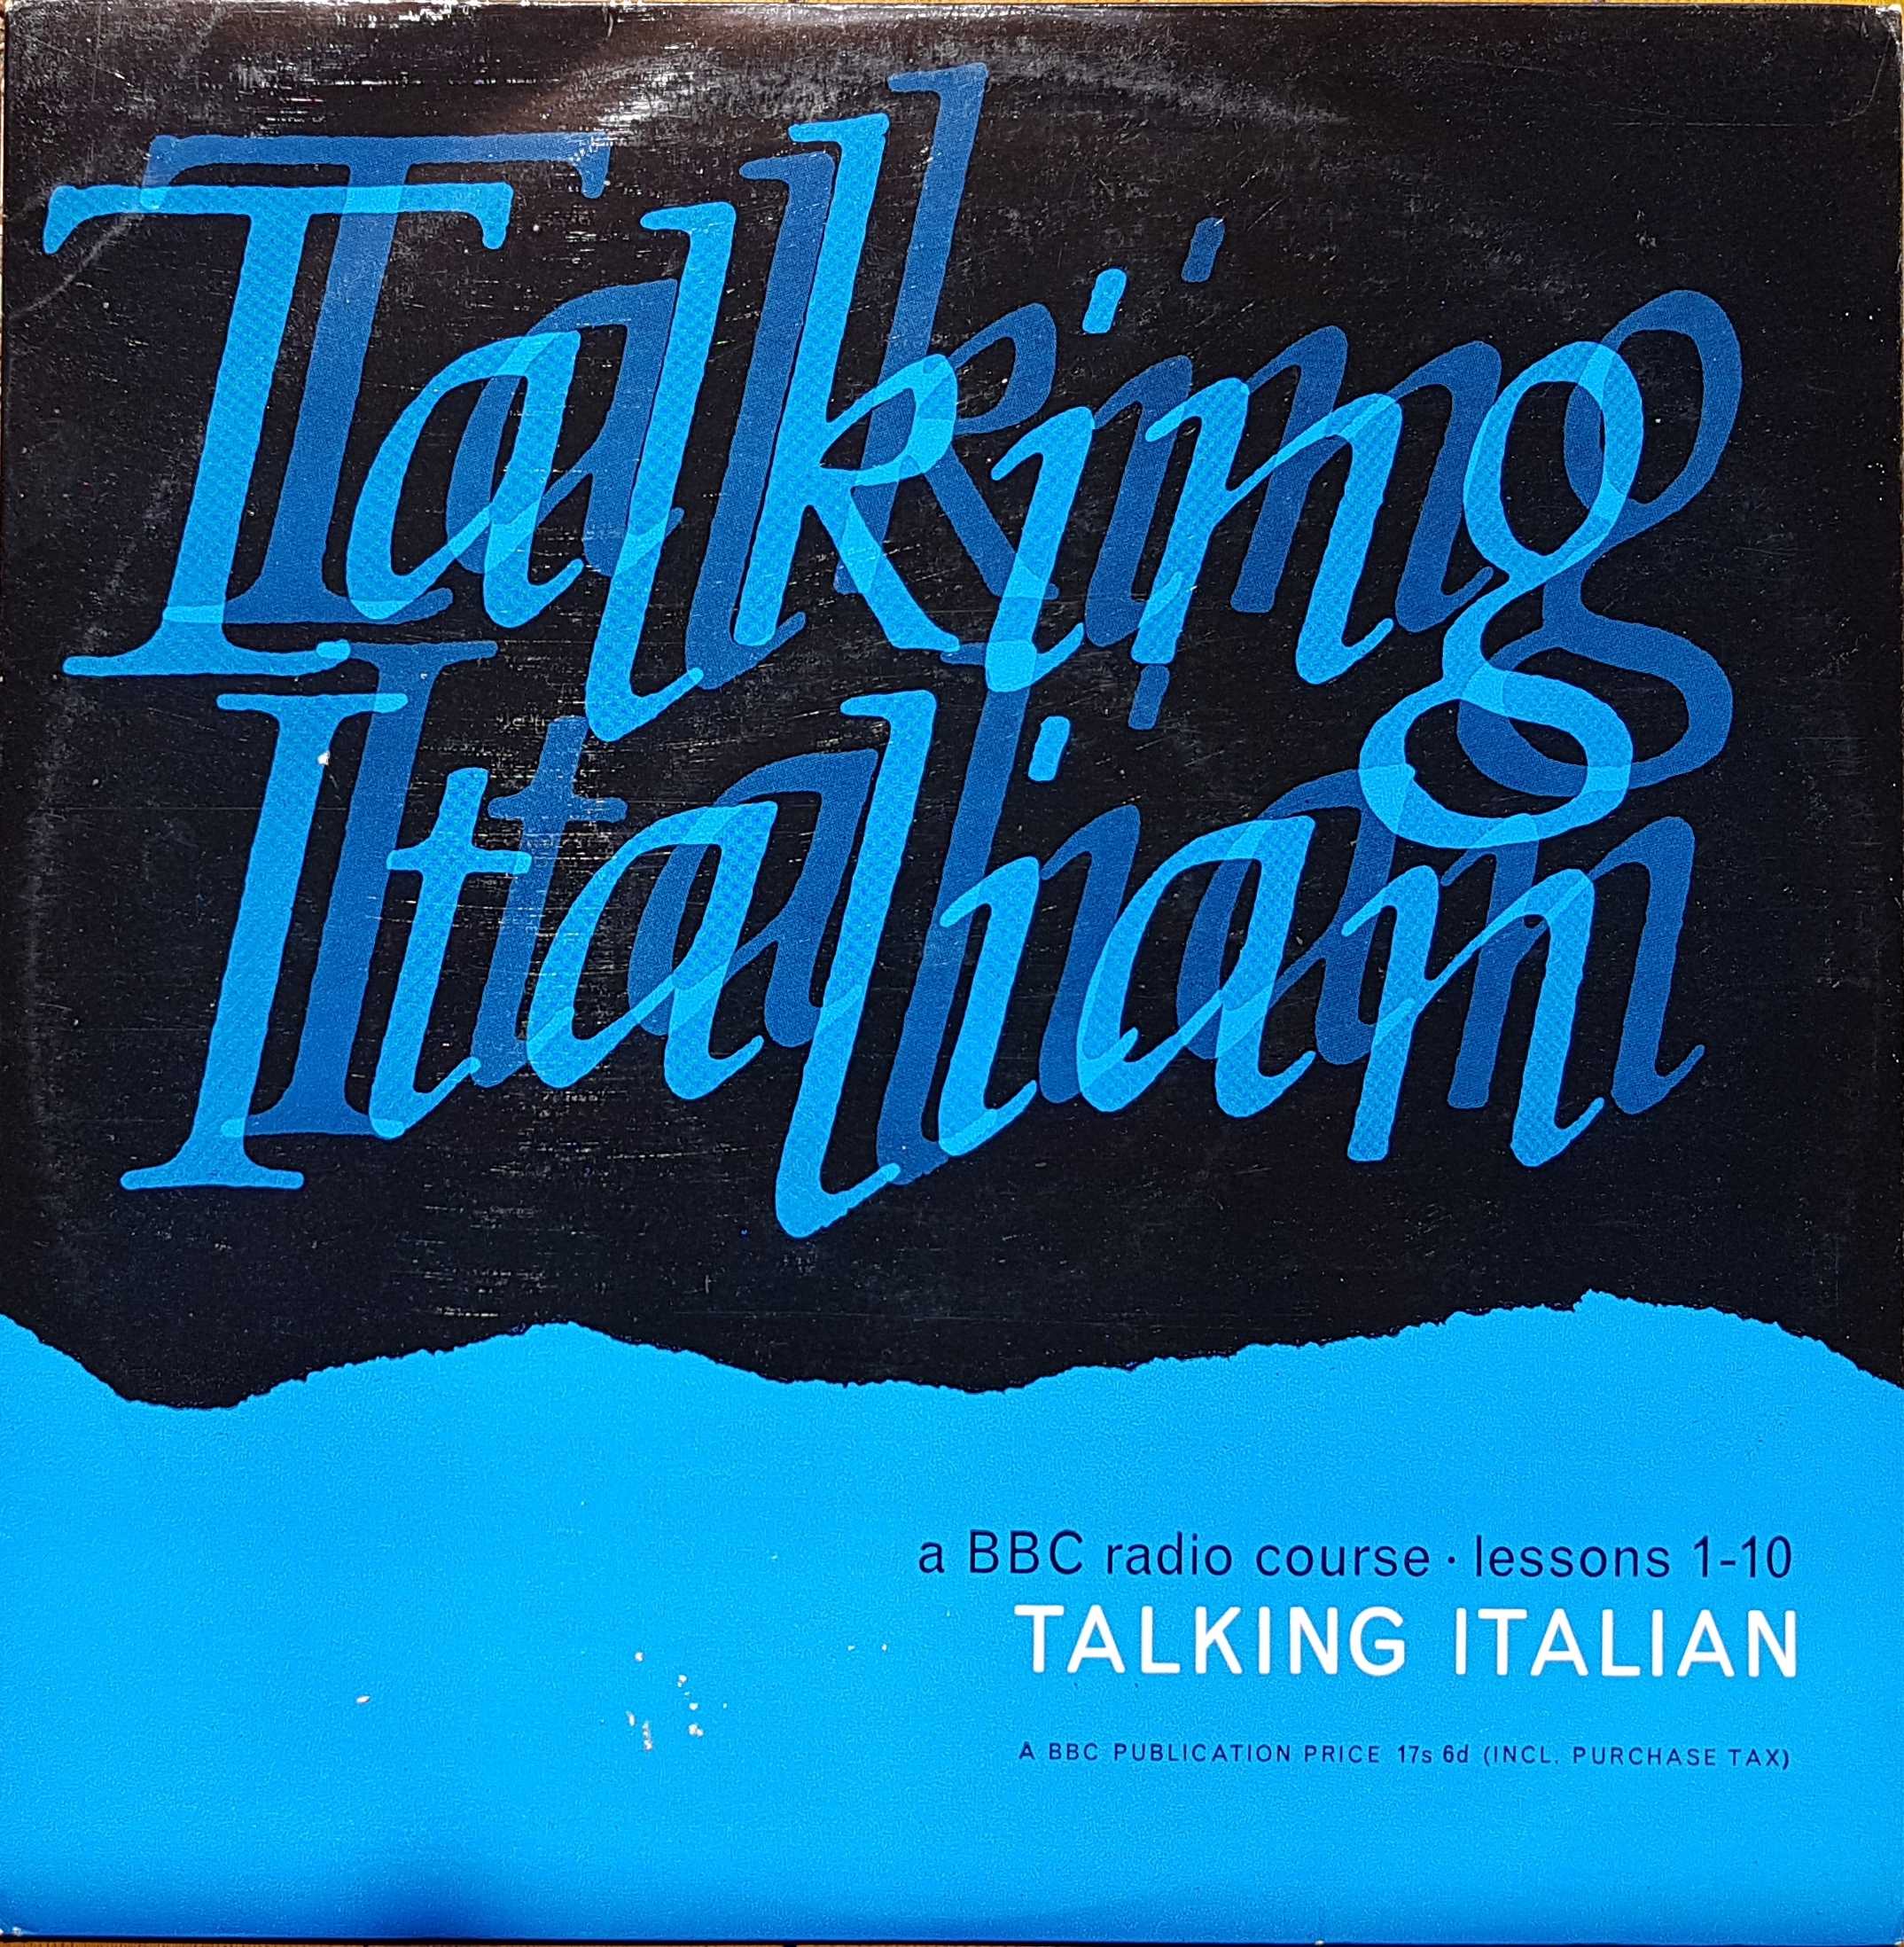 Picture of Talking Italian - Lessons 1 - 10 by artist Pietro Giorgetti from the BBC albums - Records and Tapes library